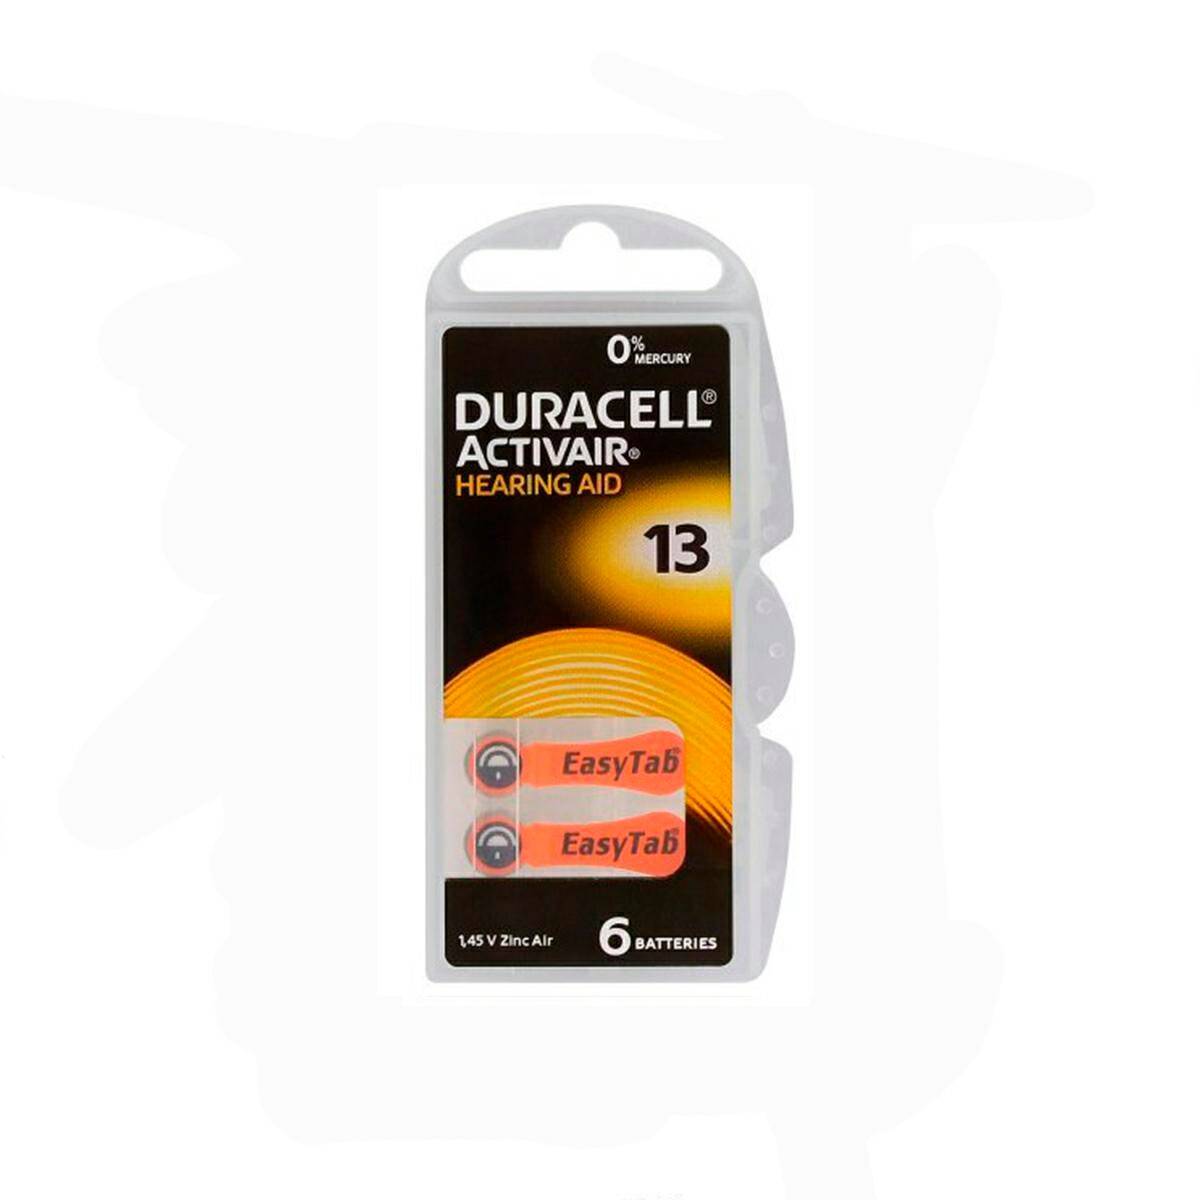 Battery Duracell Hearing AID 13 1,45V